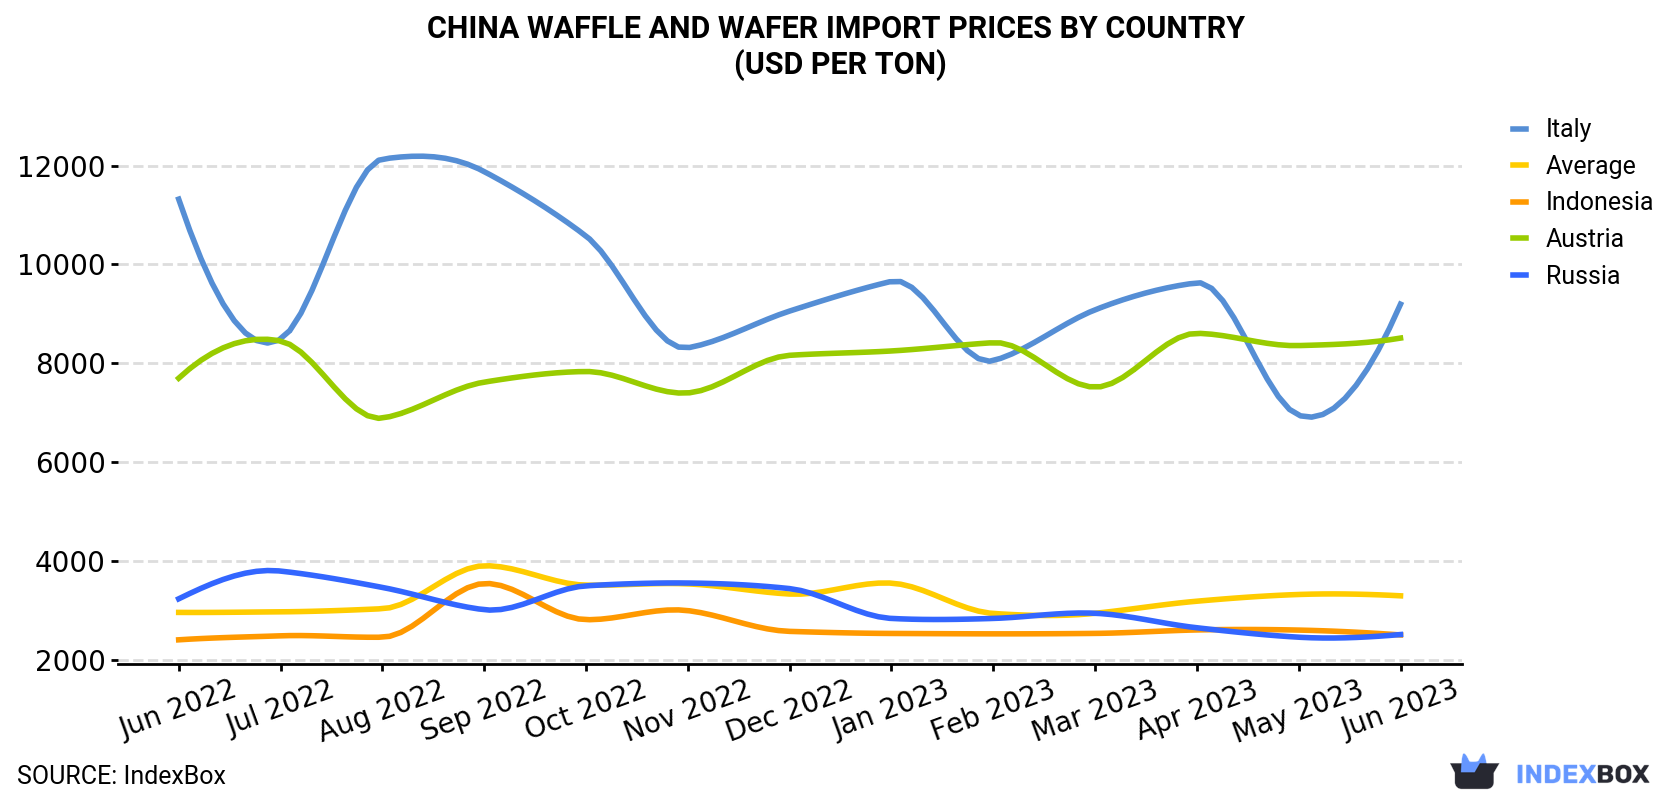 China Waffle and Wafer Import Prices By Country (USD Per Ton)